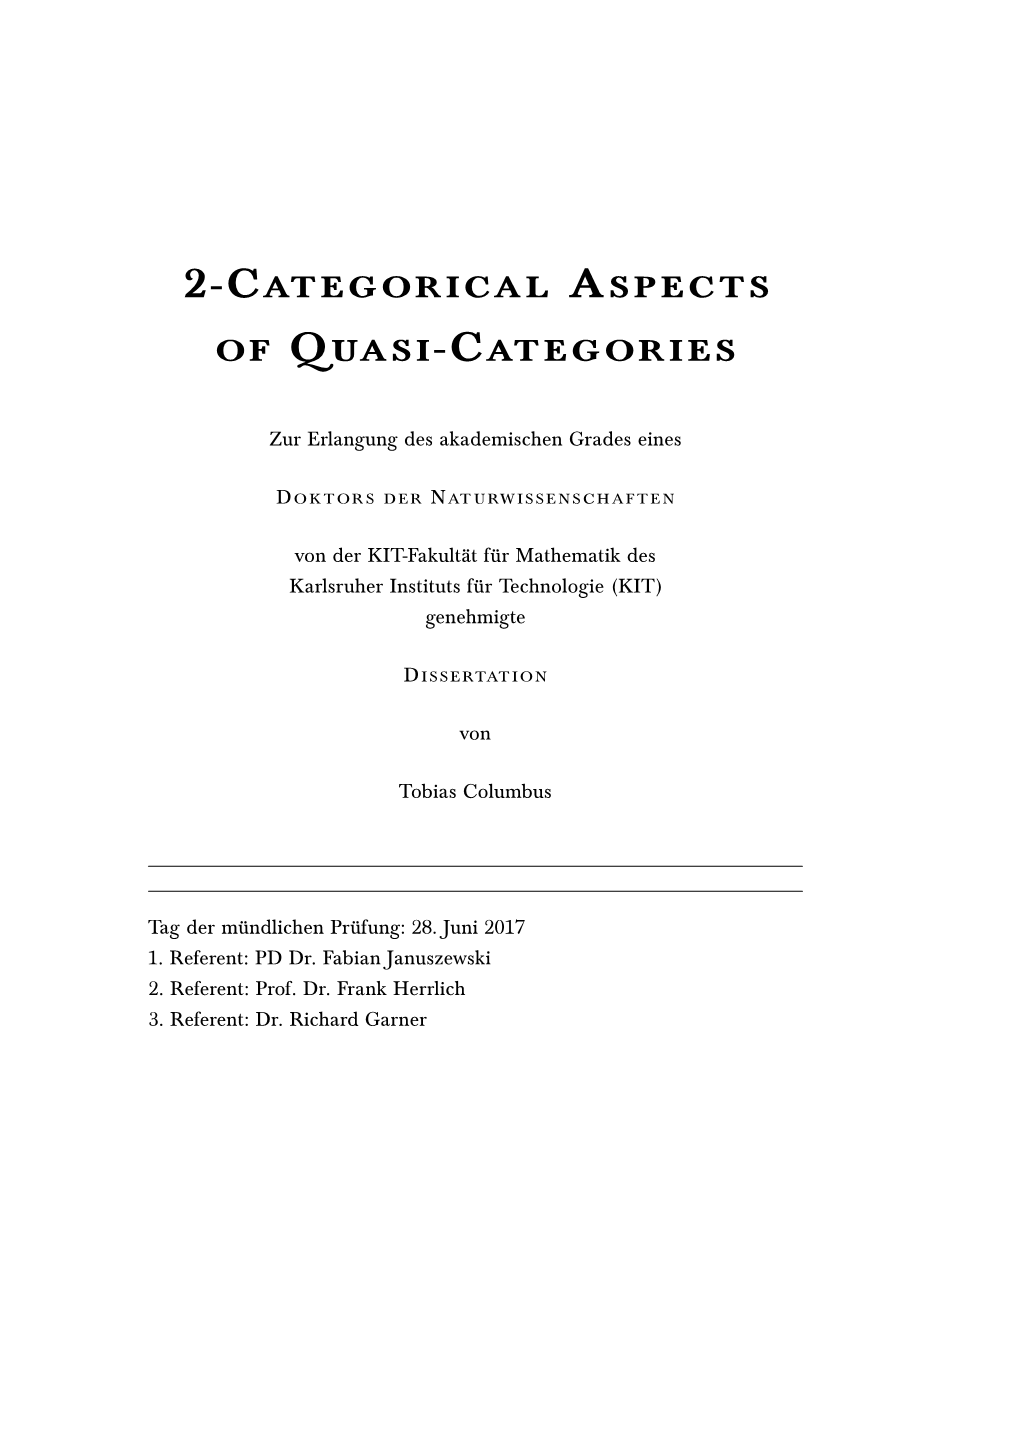 2-Categorical Aspects of Quasi-Categories